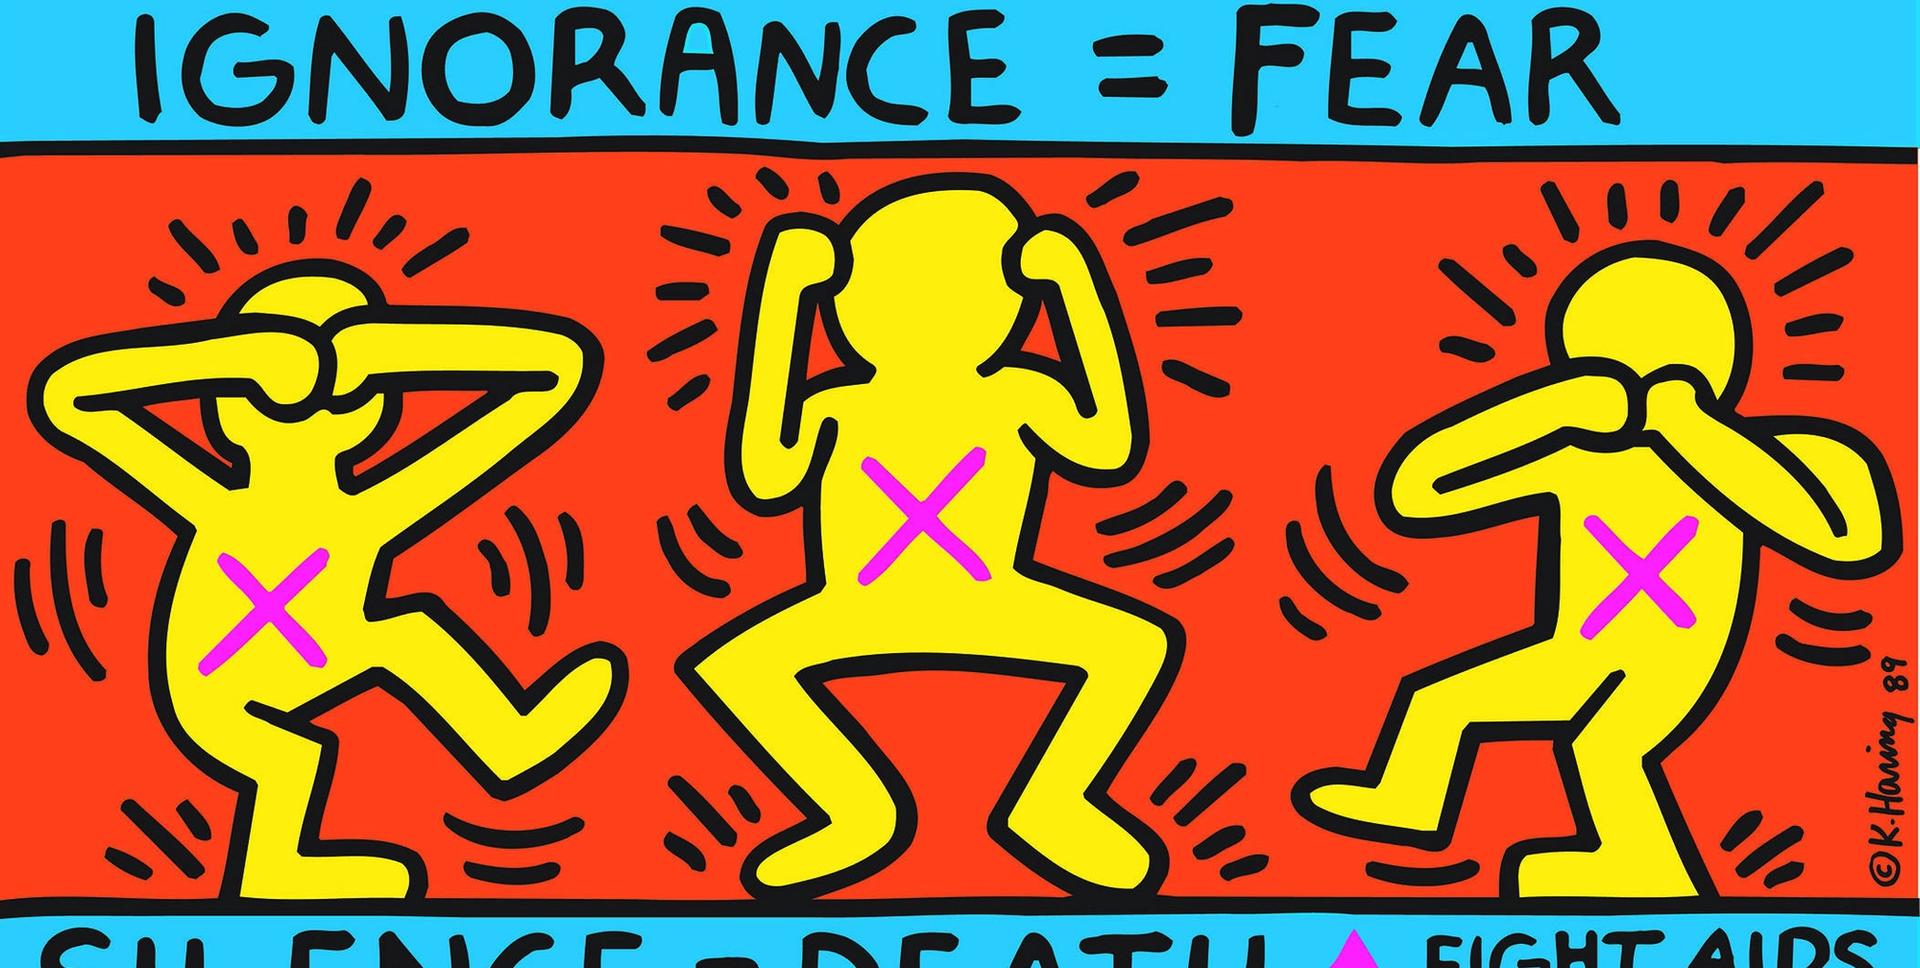 Keith Haring, Ignorance = Fear, Silence = Death,  1989, lithographie offset, 61,1 cm x 109,4 cm. © Keith Haring Foundation